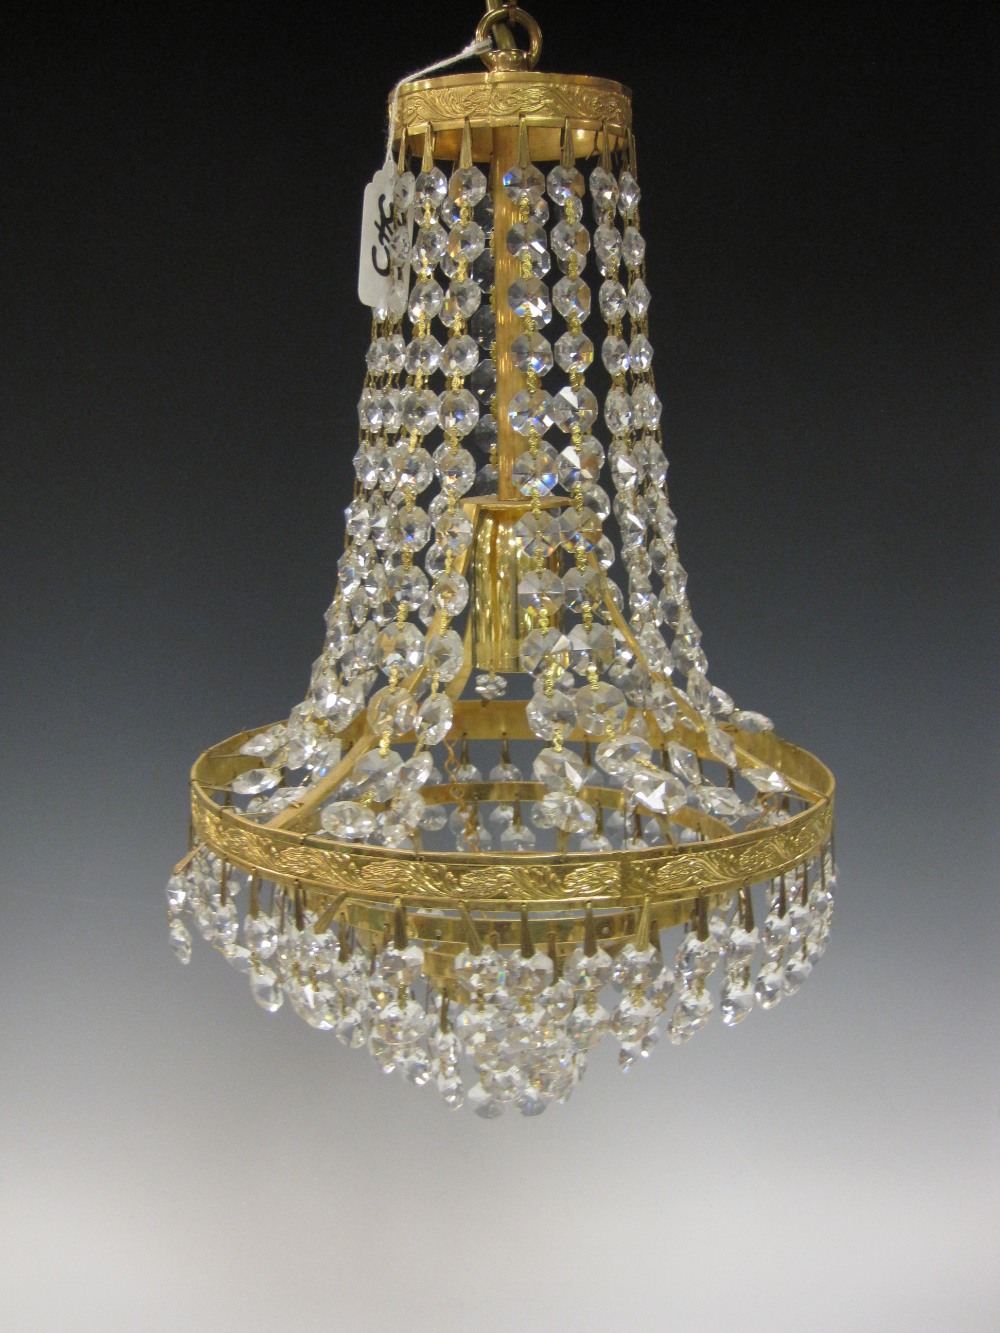 A cut-glass Chandelier with rows of pendant drops on ormolu effect mounts - Image 2 of 2